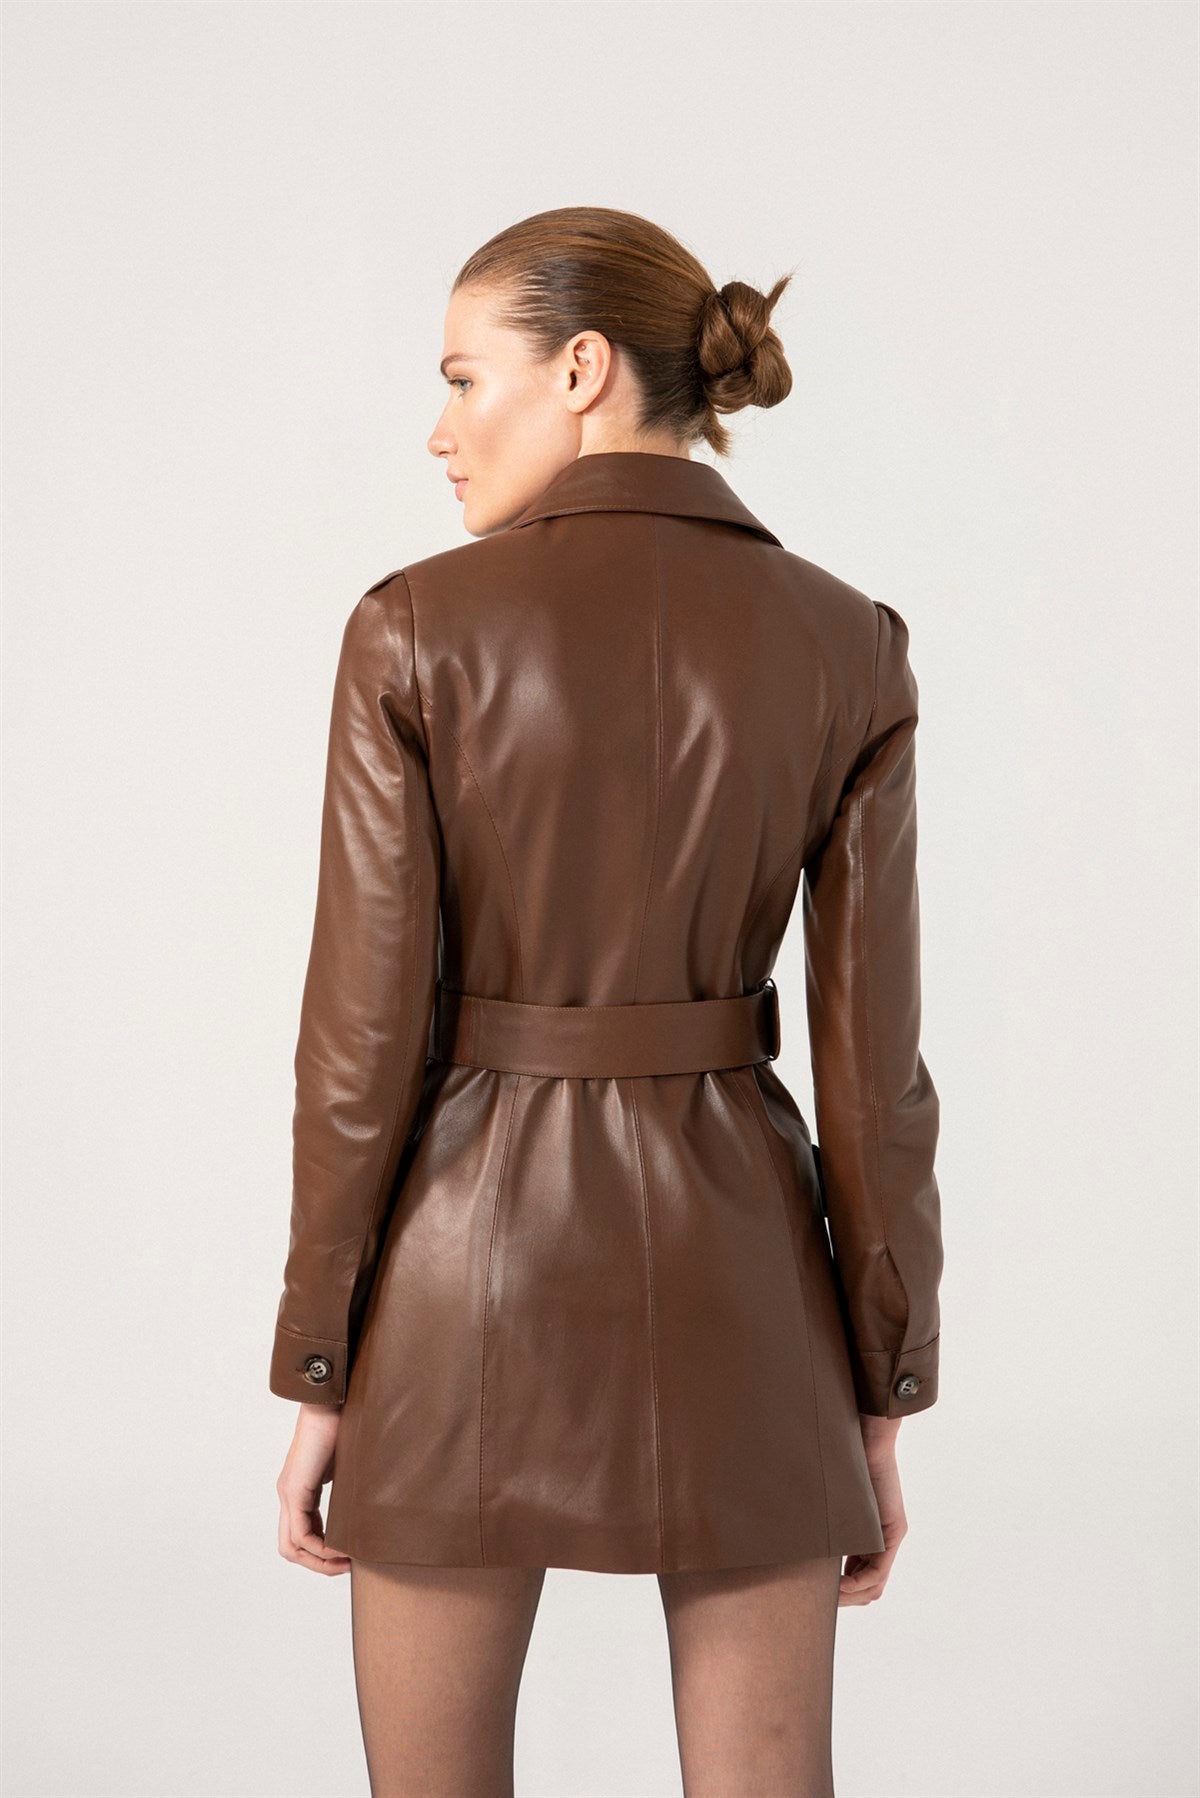 Louis Vuitton Leather Outer Shell Brown Coats, Jackets & Vests for